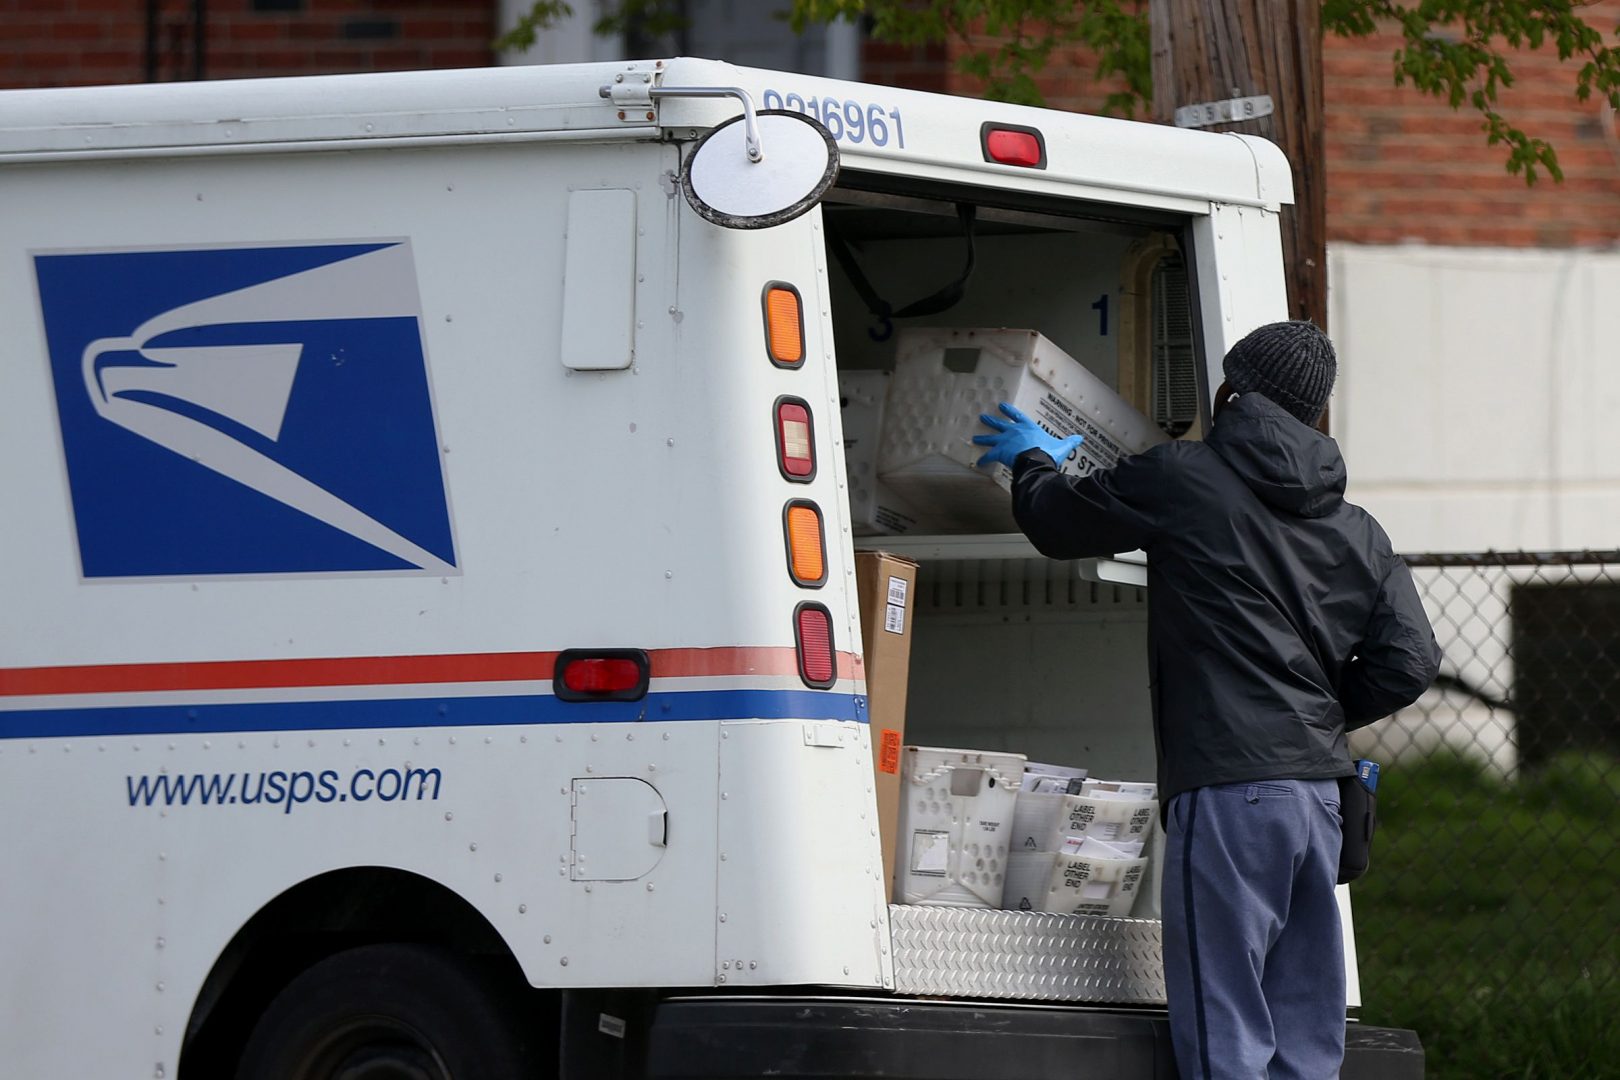 After lawsuits from 16 stations, including Pennsylvania, the Postal Service has committed to all electric delivery vehicles beginning in 2026.